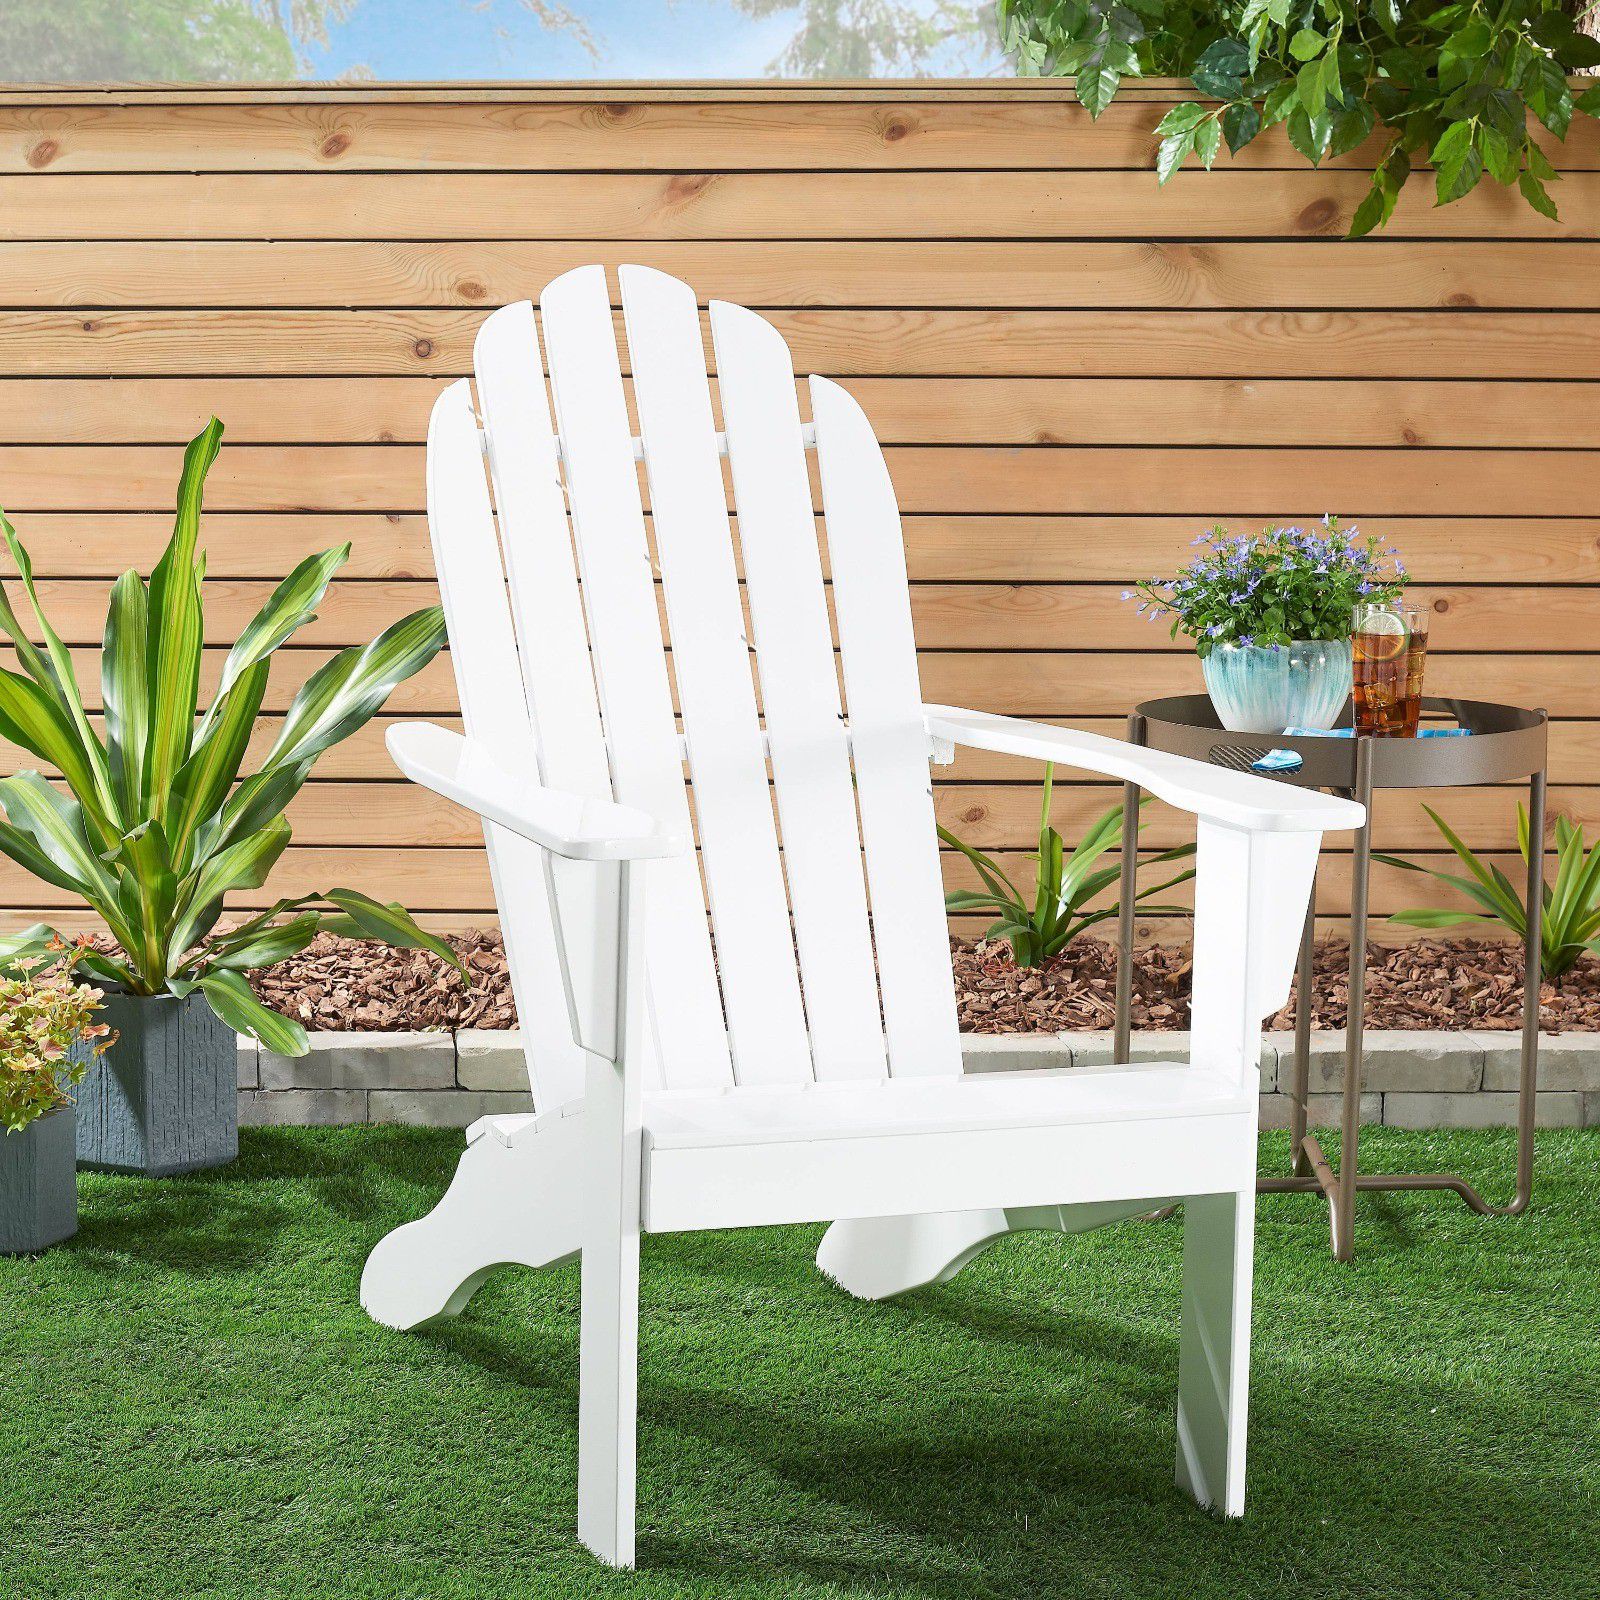 Mainstays Wooden Outdoor Adirondack Chair, White Finish, Solid Hardwood